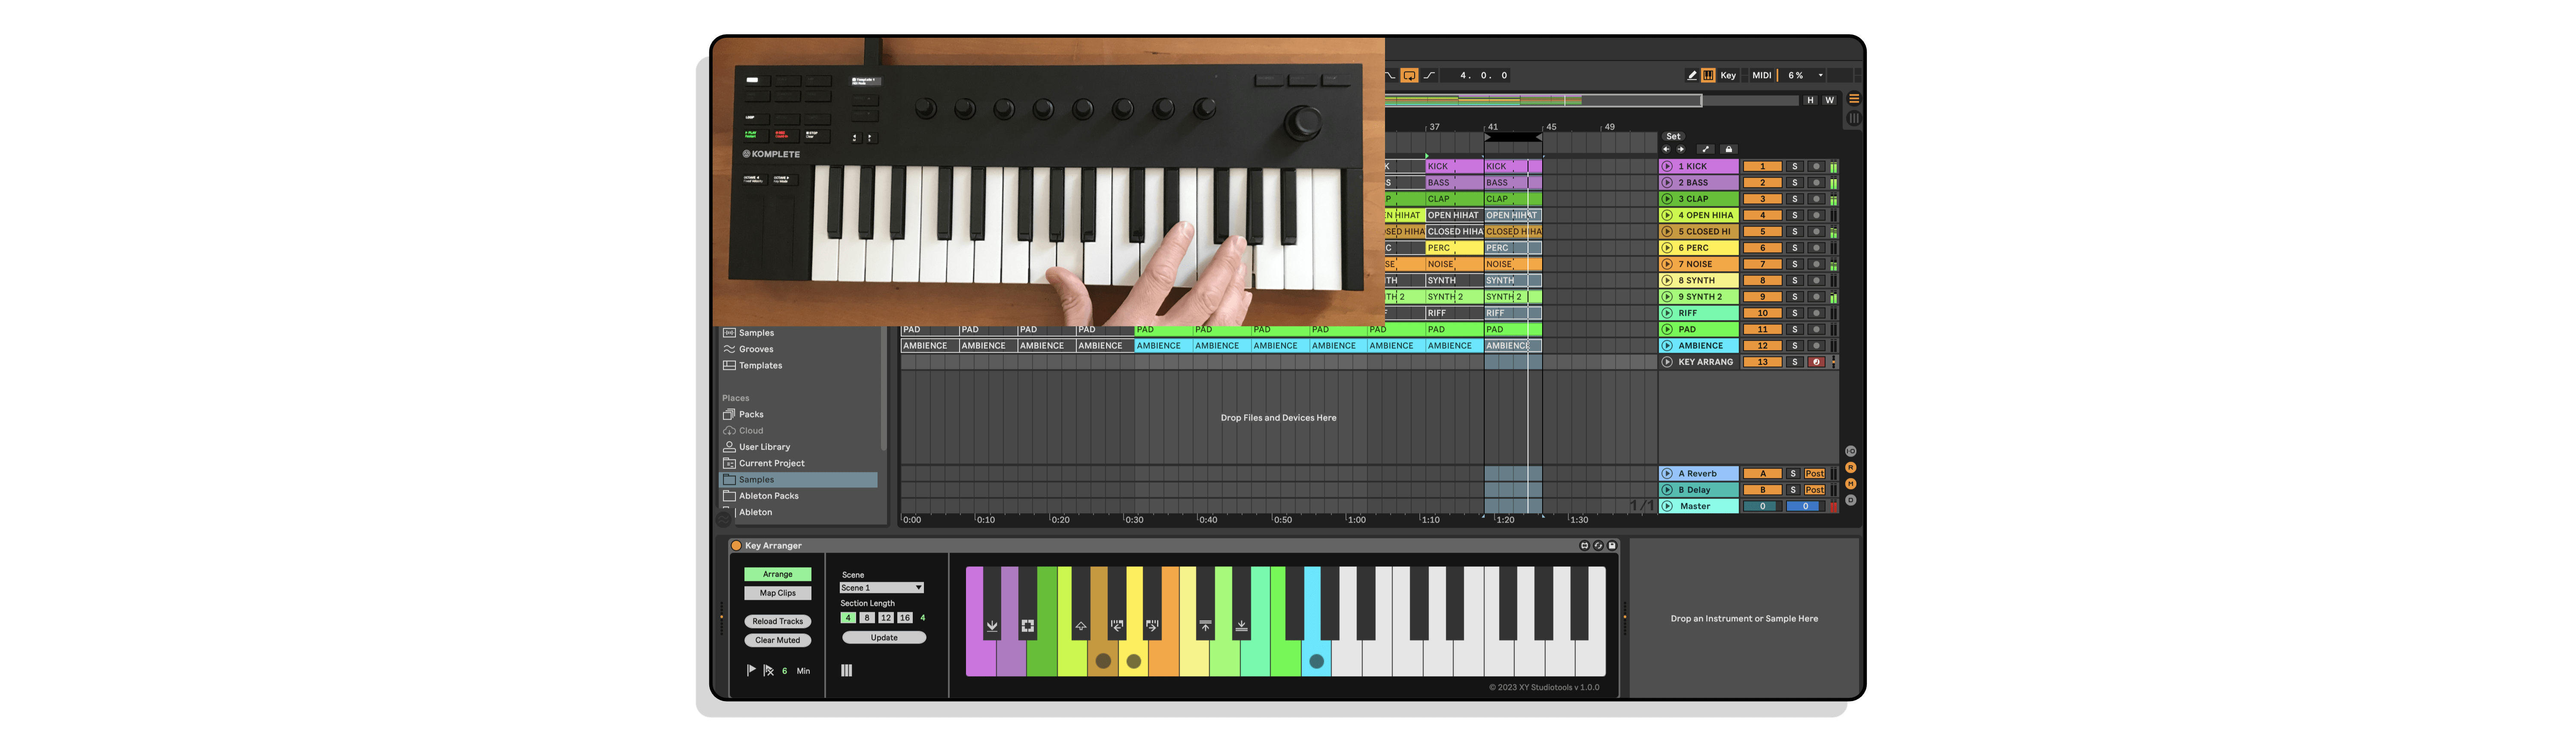 Key Arranger MaxforLive Device for Ableton Live by XY Studio Tools